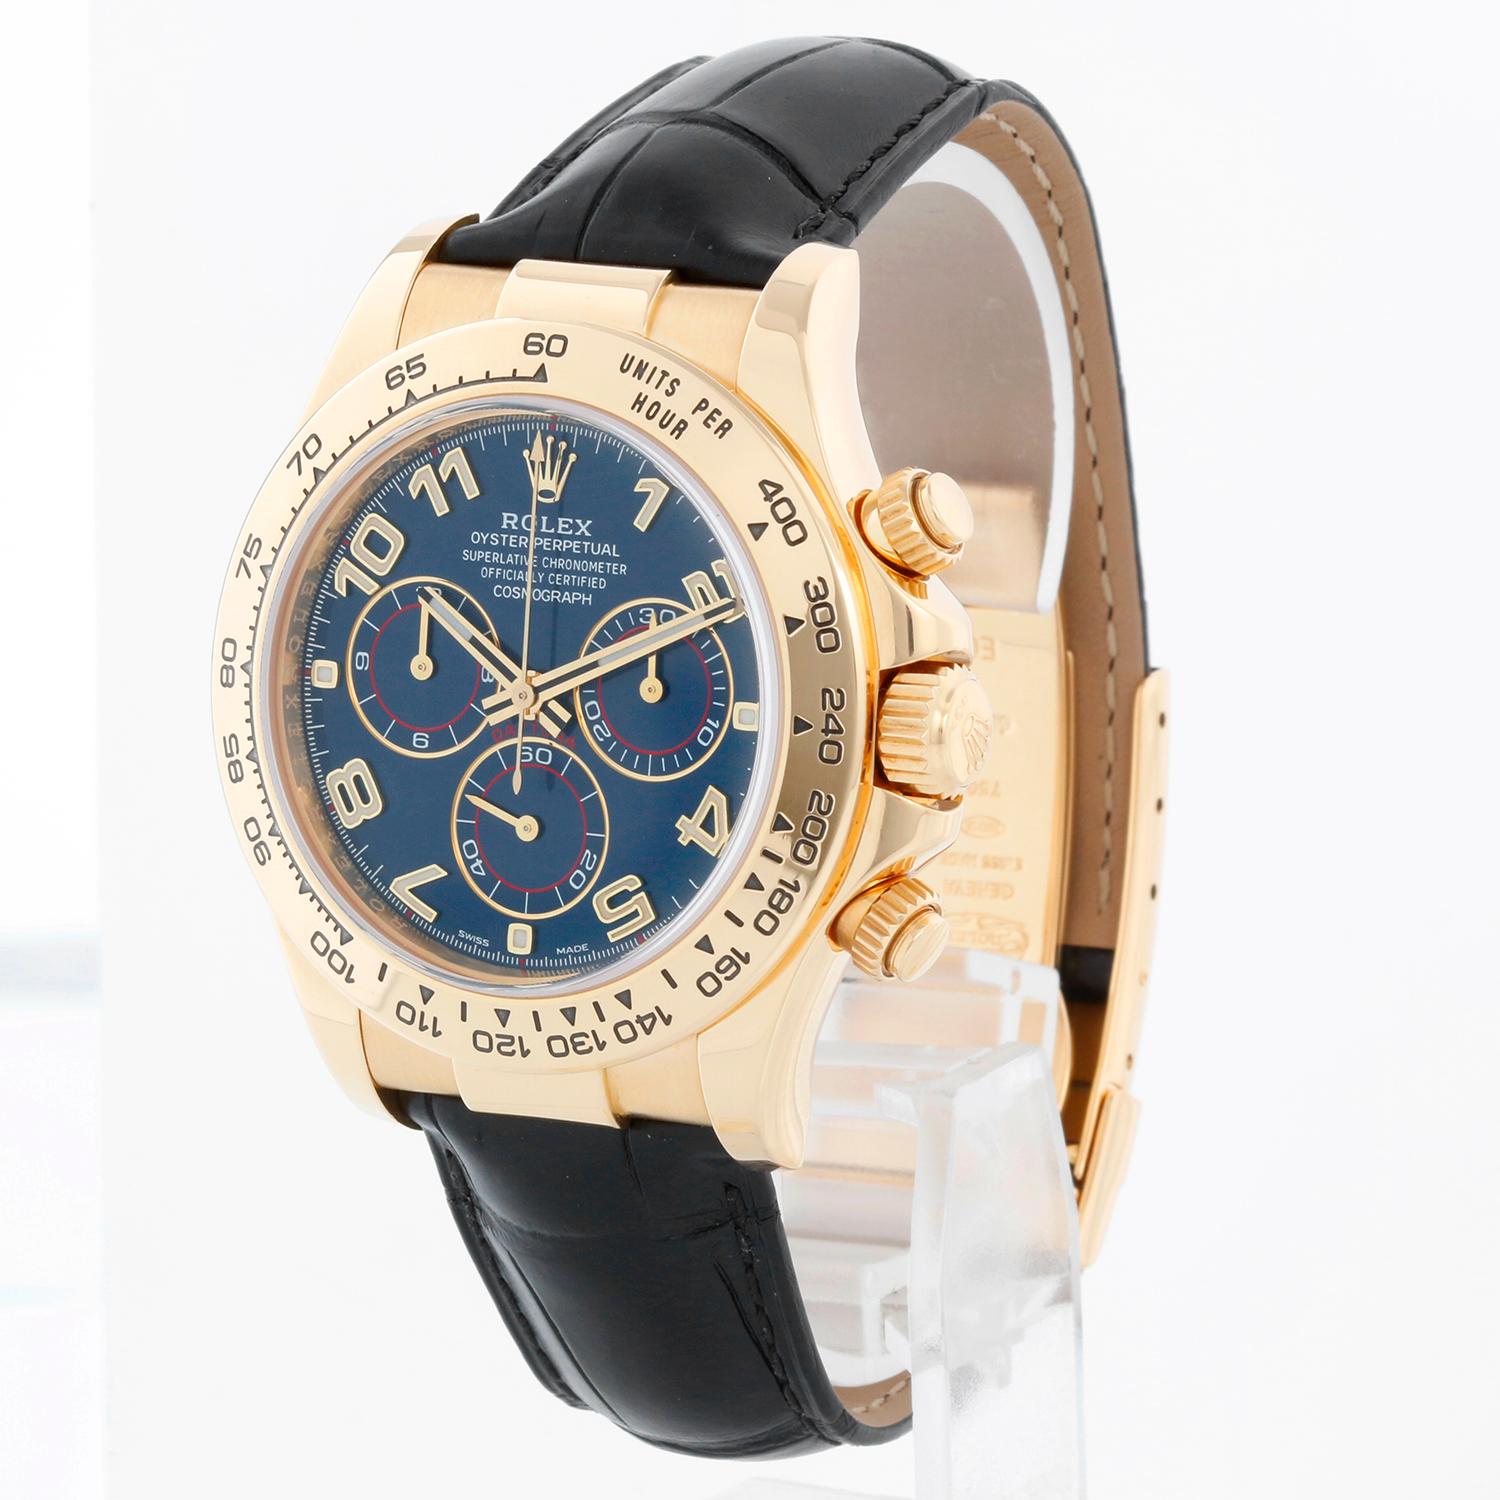 Rolex Cosmograph Daytona Men's 18k Yellow Gold Watch 116518 - Automatic winding, chronograph, 44 jewels, sapphire crystal. 18k yellow gold case and bezel with stickers. Blue racing dial. Rolex black leather strap with 18k yellow gold deployant